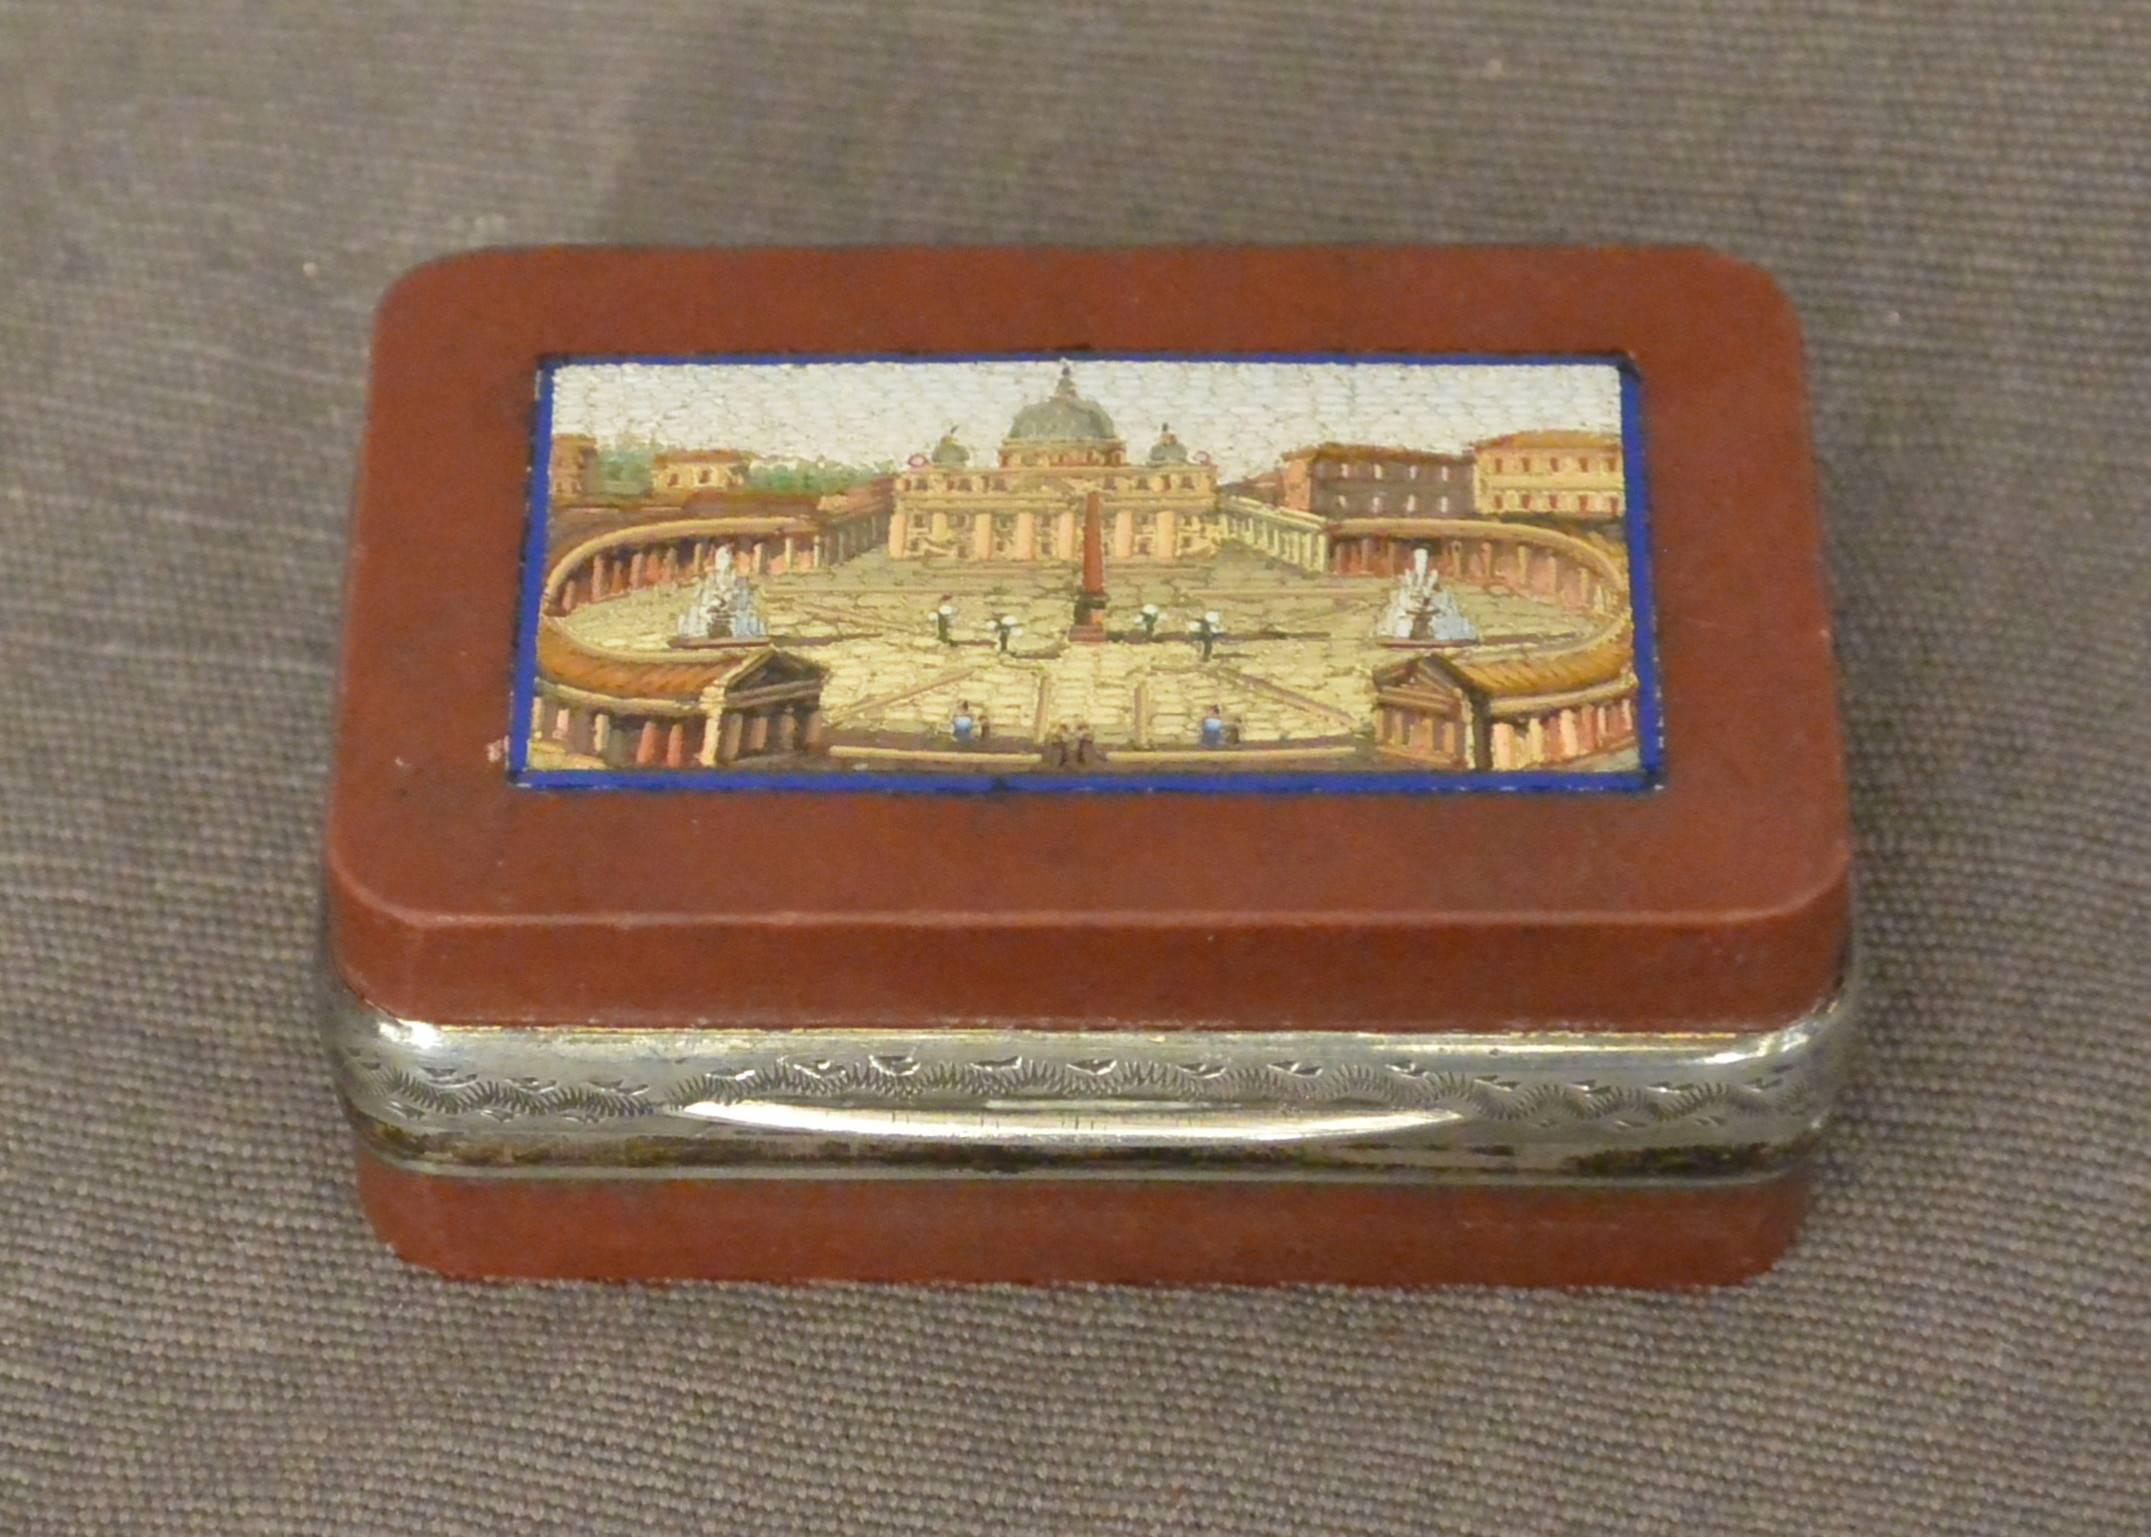 Mosaic Micromosaic Snuff Box with View of St. Peter's For Sale